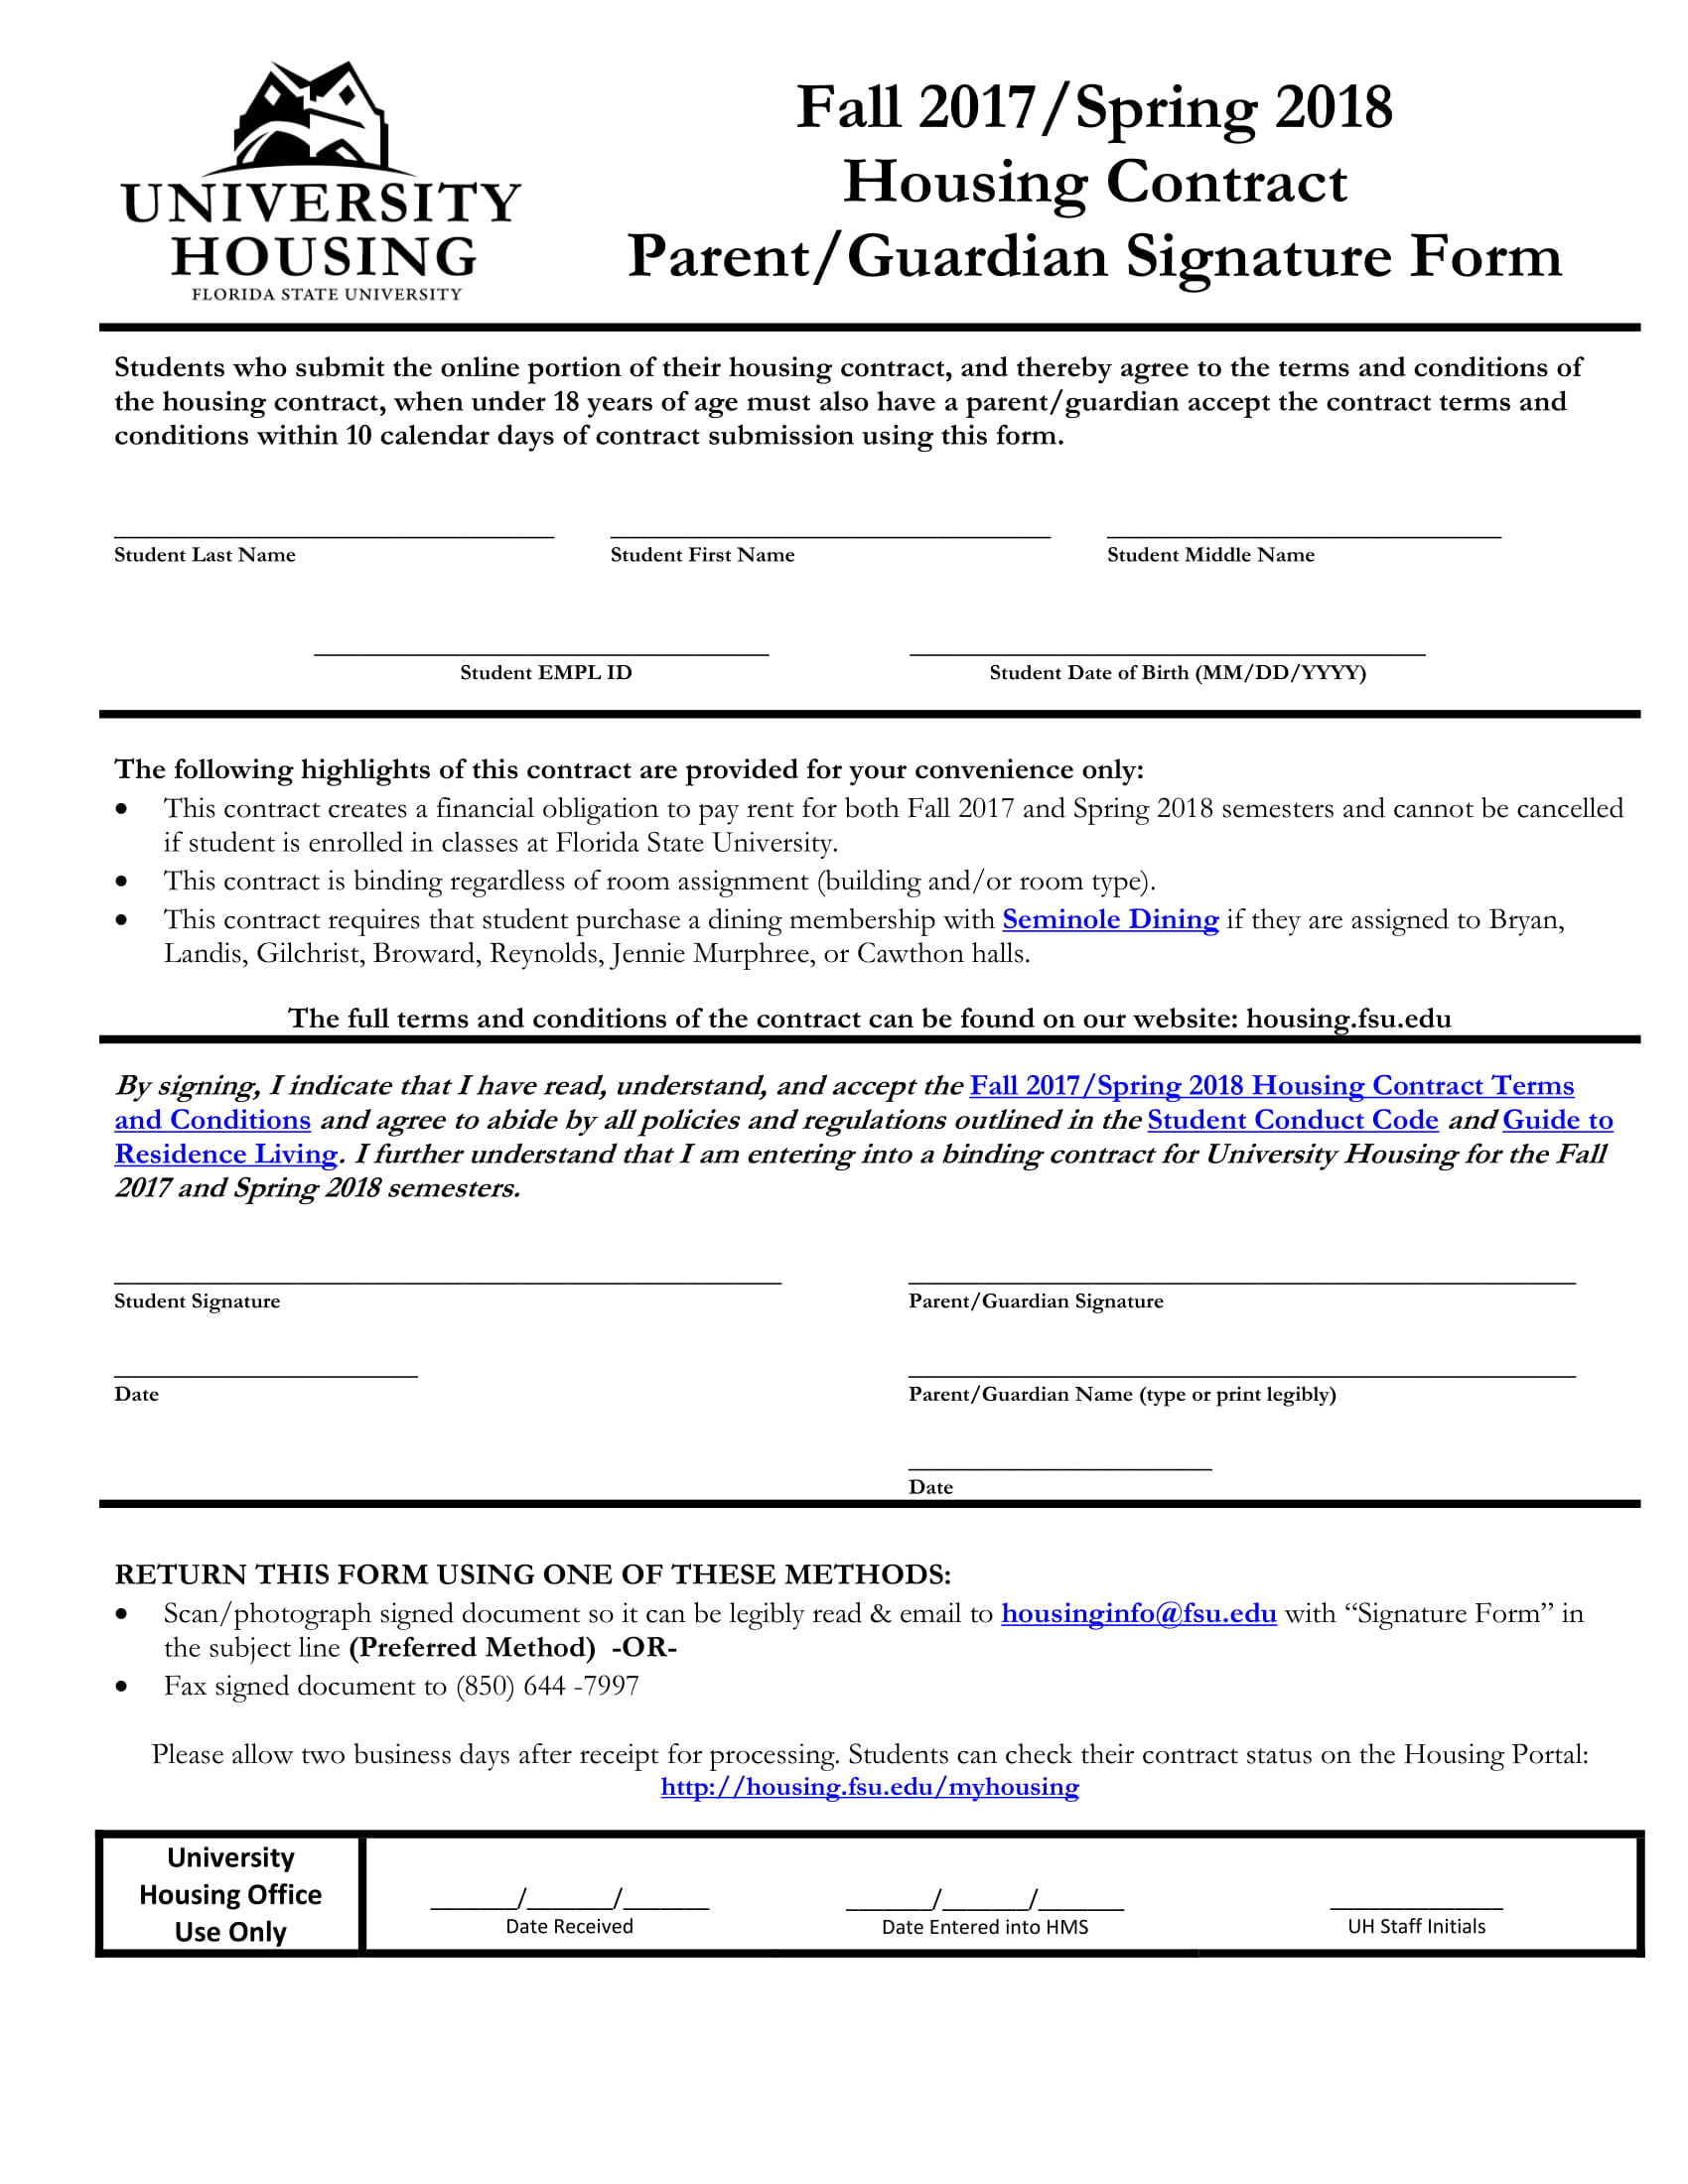 housing contract guardian signature form 1